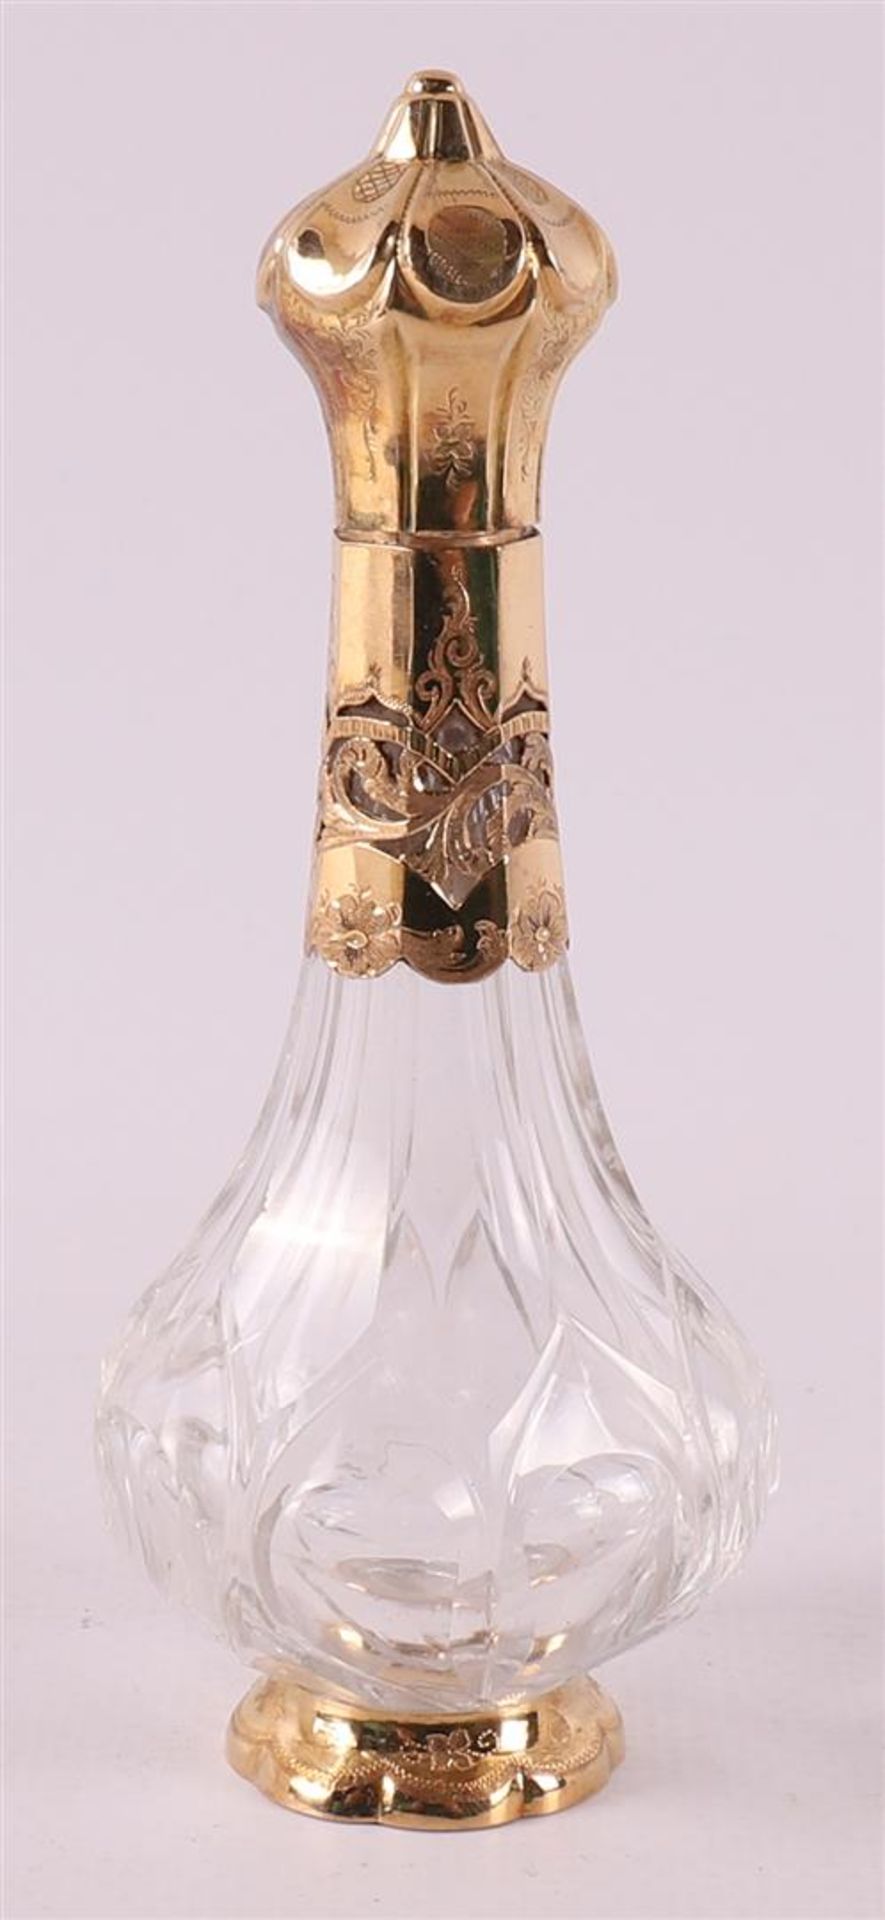 A clear crystal odor flask with gold lid and frame, 19th century. - Image 2 of 7